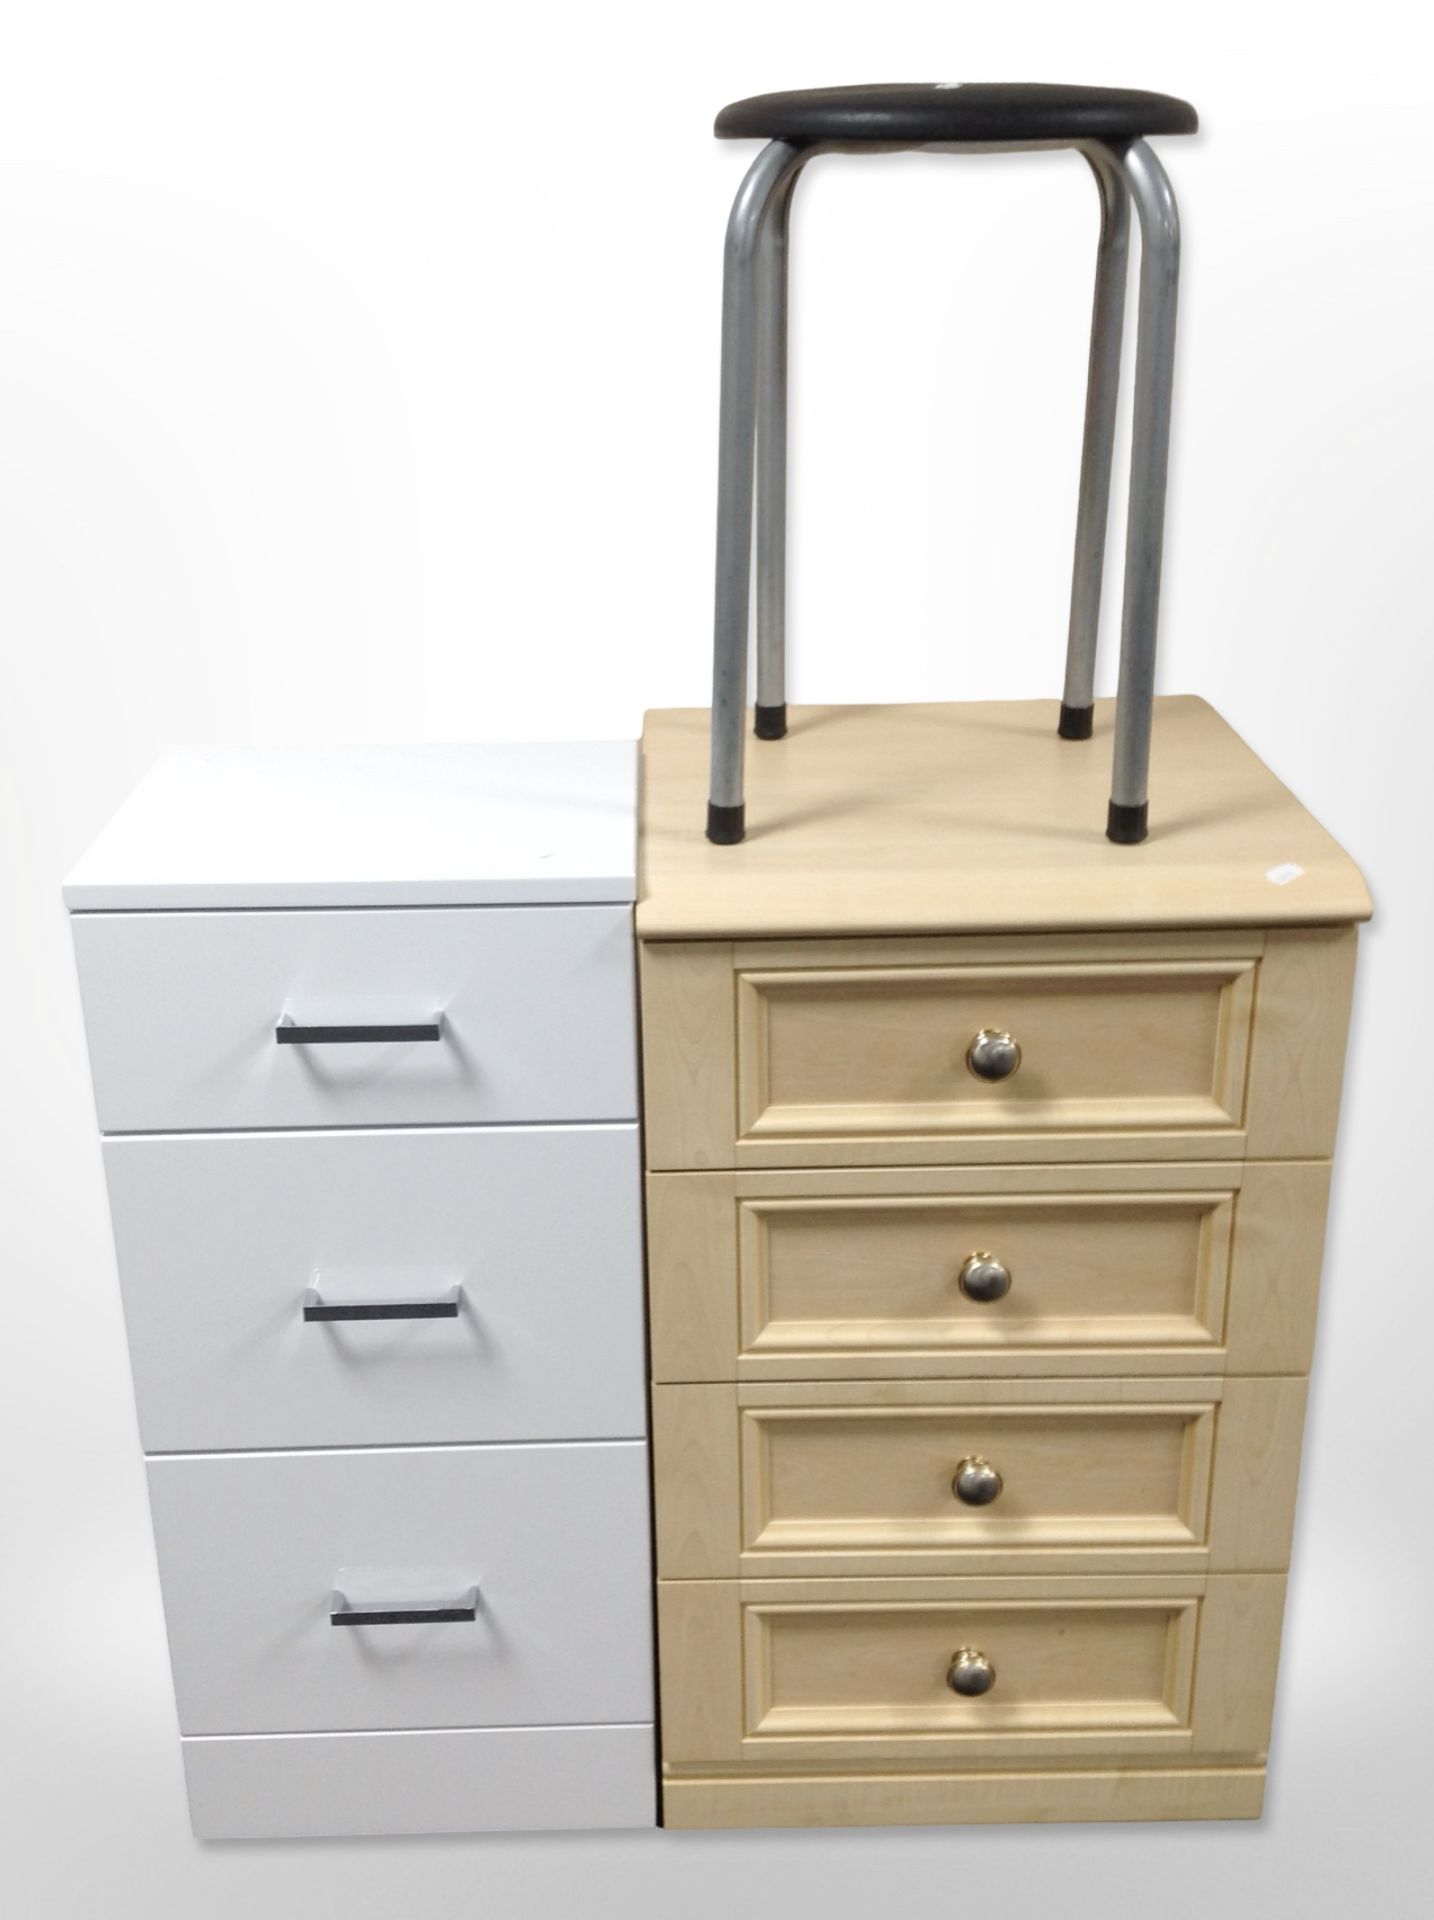 Two contemporary bedside chests and a stool